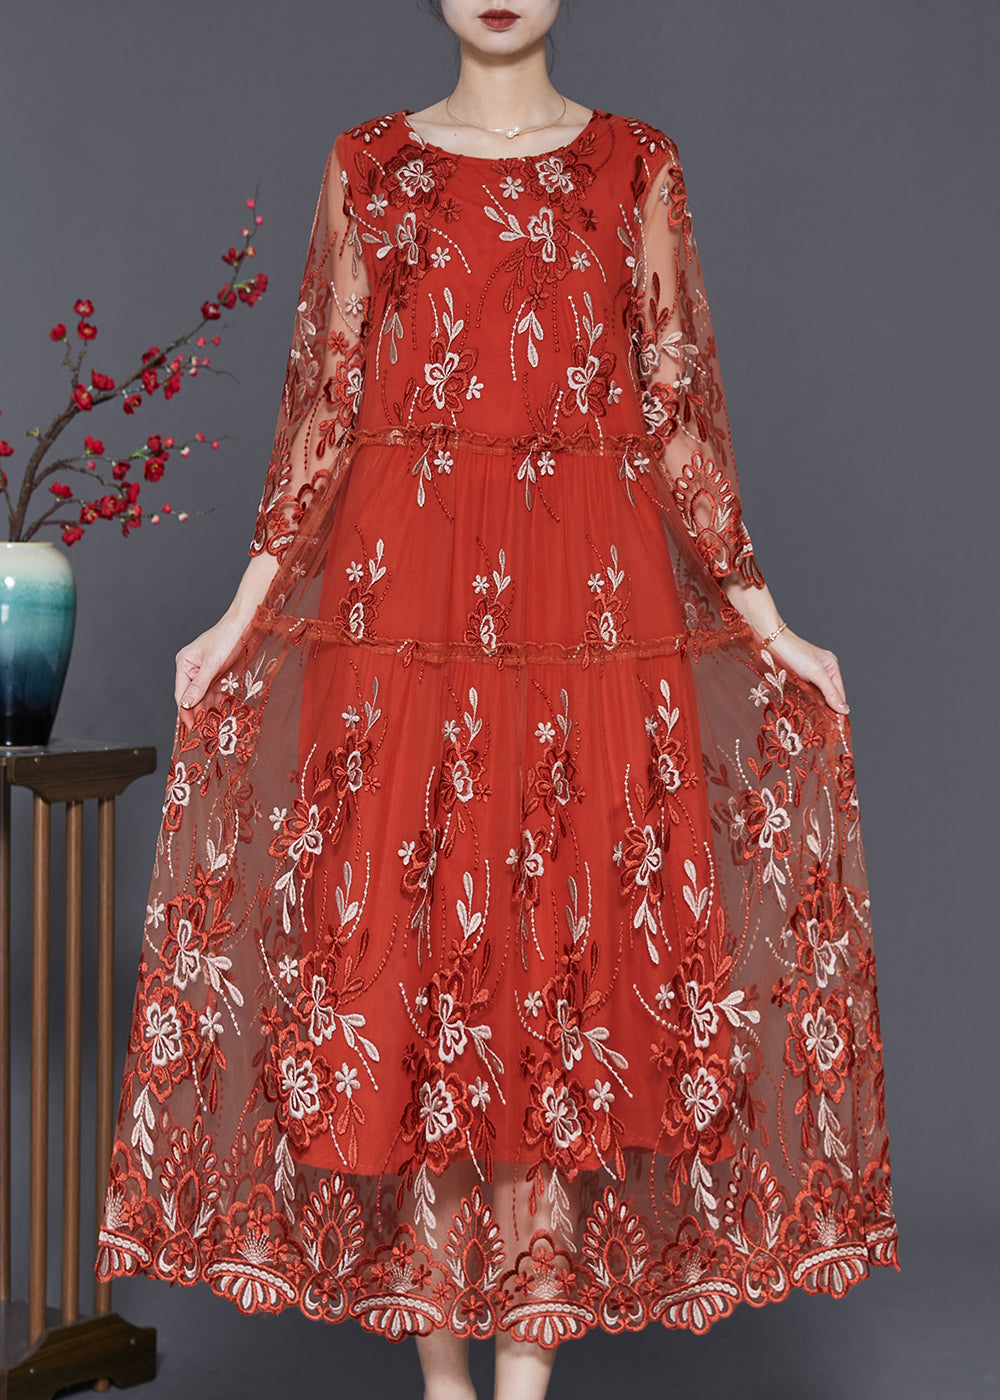 Brick Red Hollow Out Tulle Robe Dresses Embroidered Summer